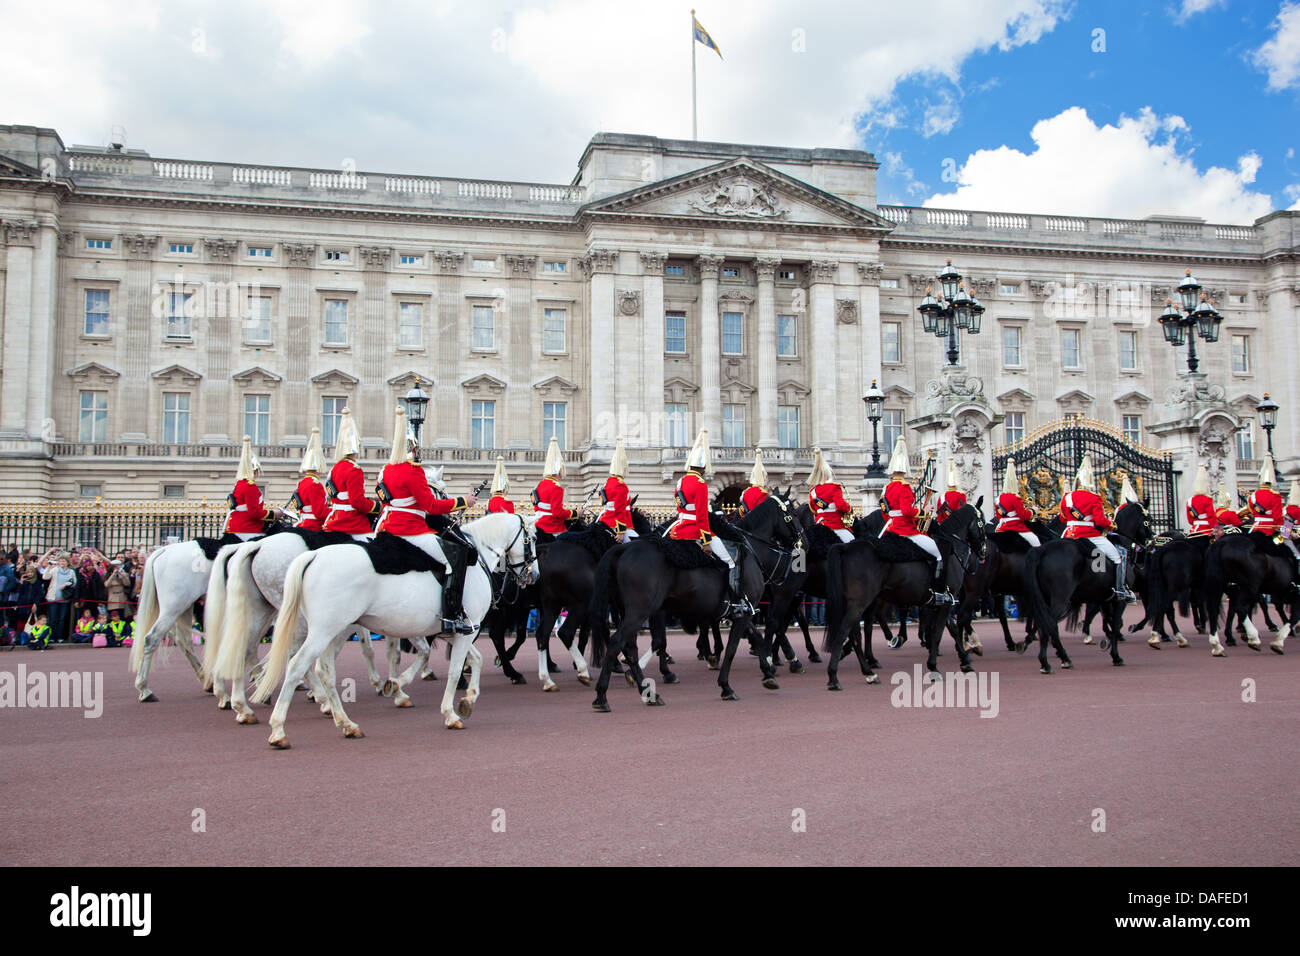 LONDON - MAY 17: British Royal guards riding on horse and perform the Changing of the Guard in Buckingham Palace on May 17, 2013 Stock Photo